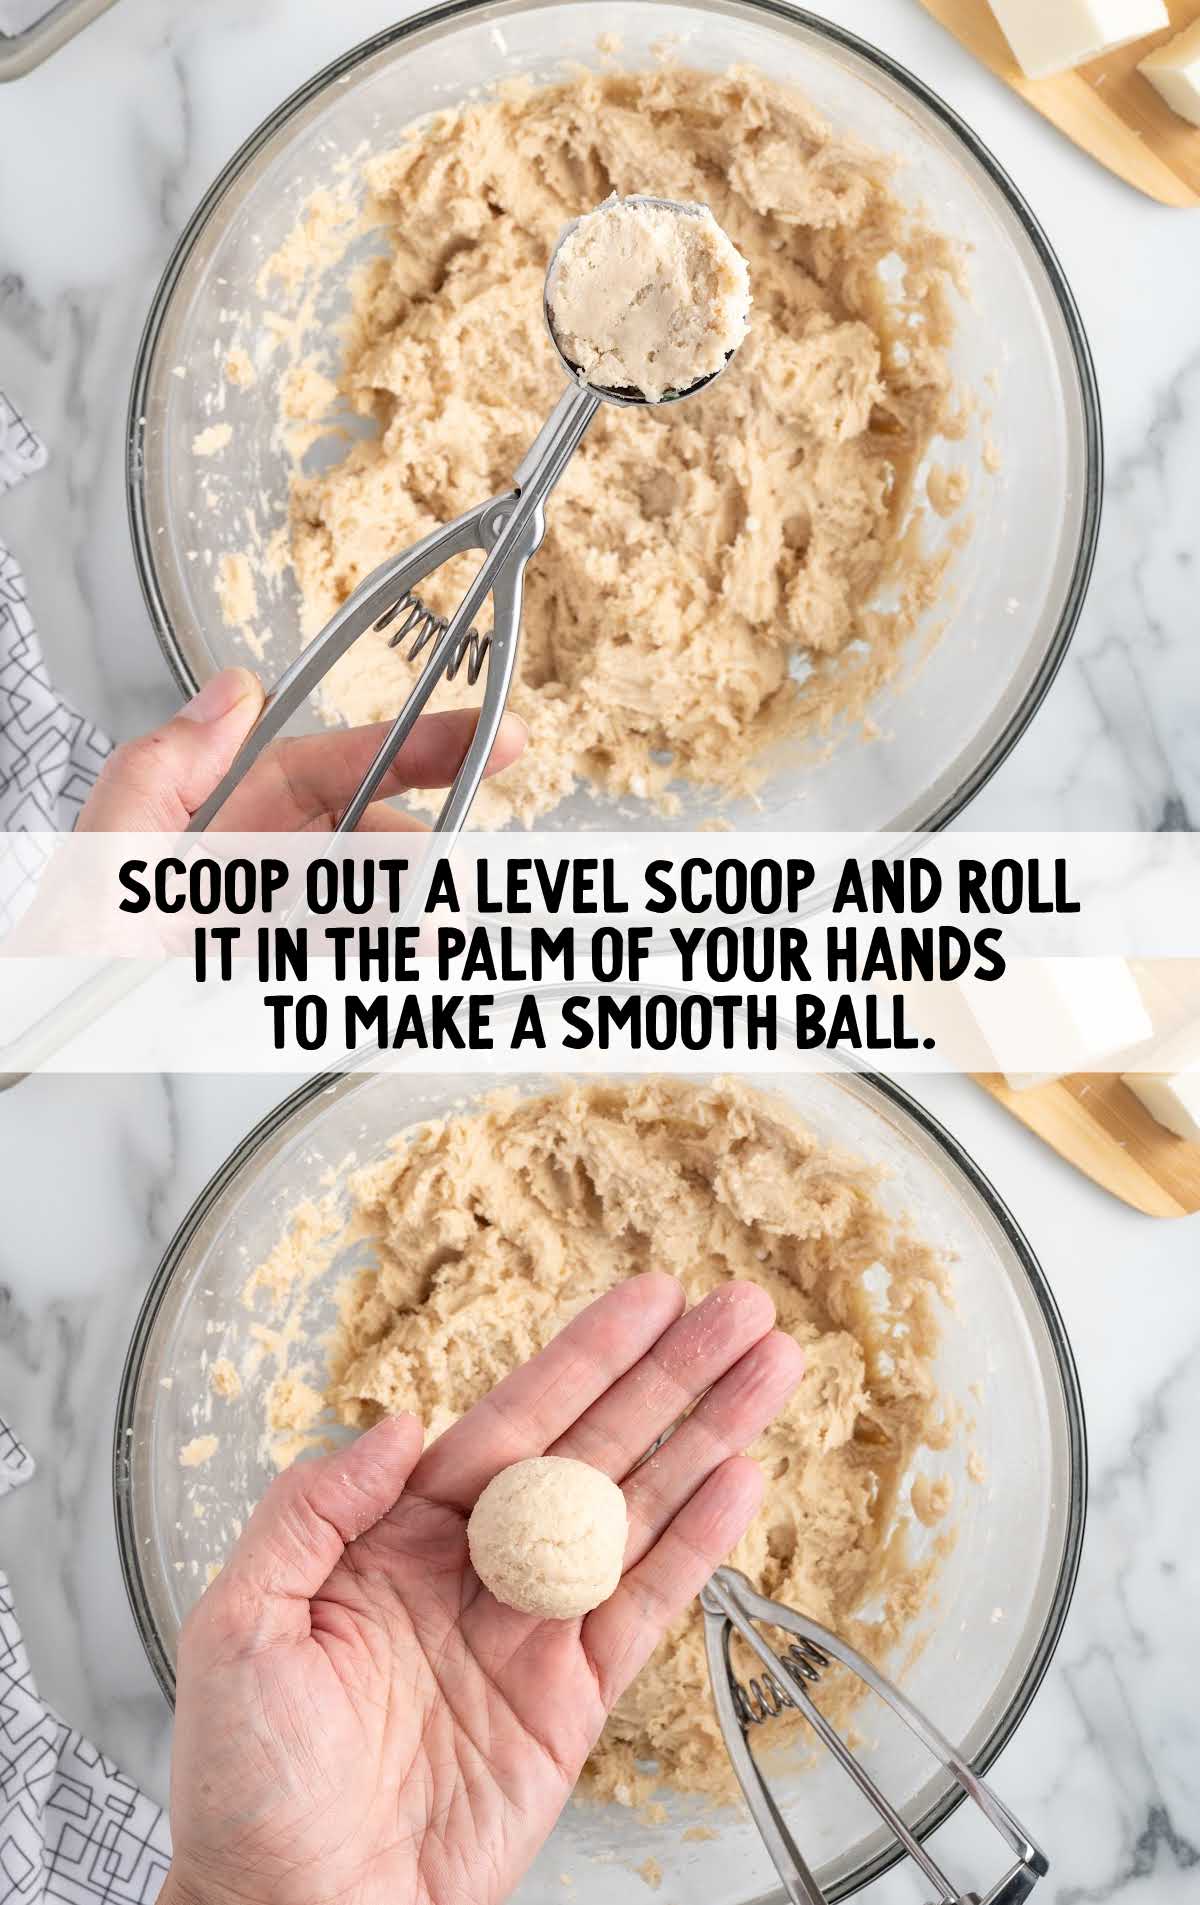 scoop out mixture and roll into a ball